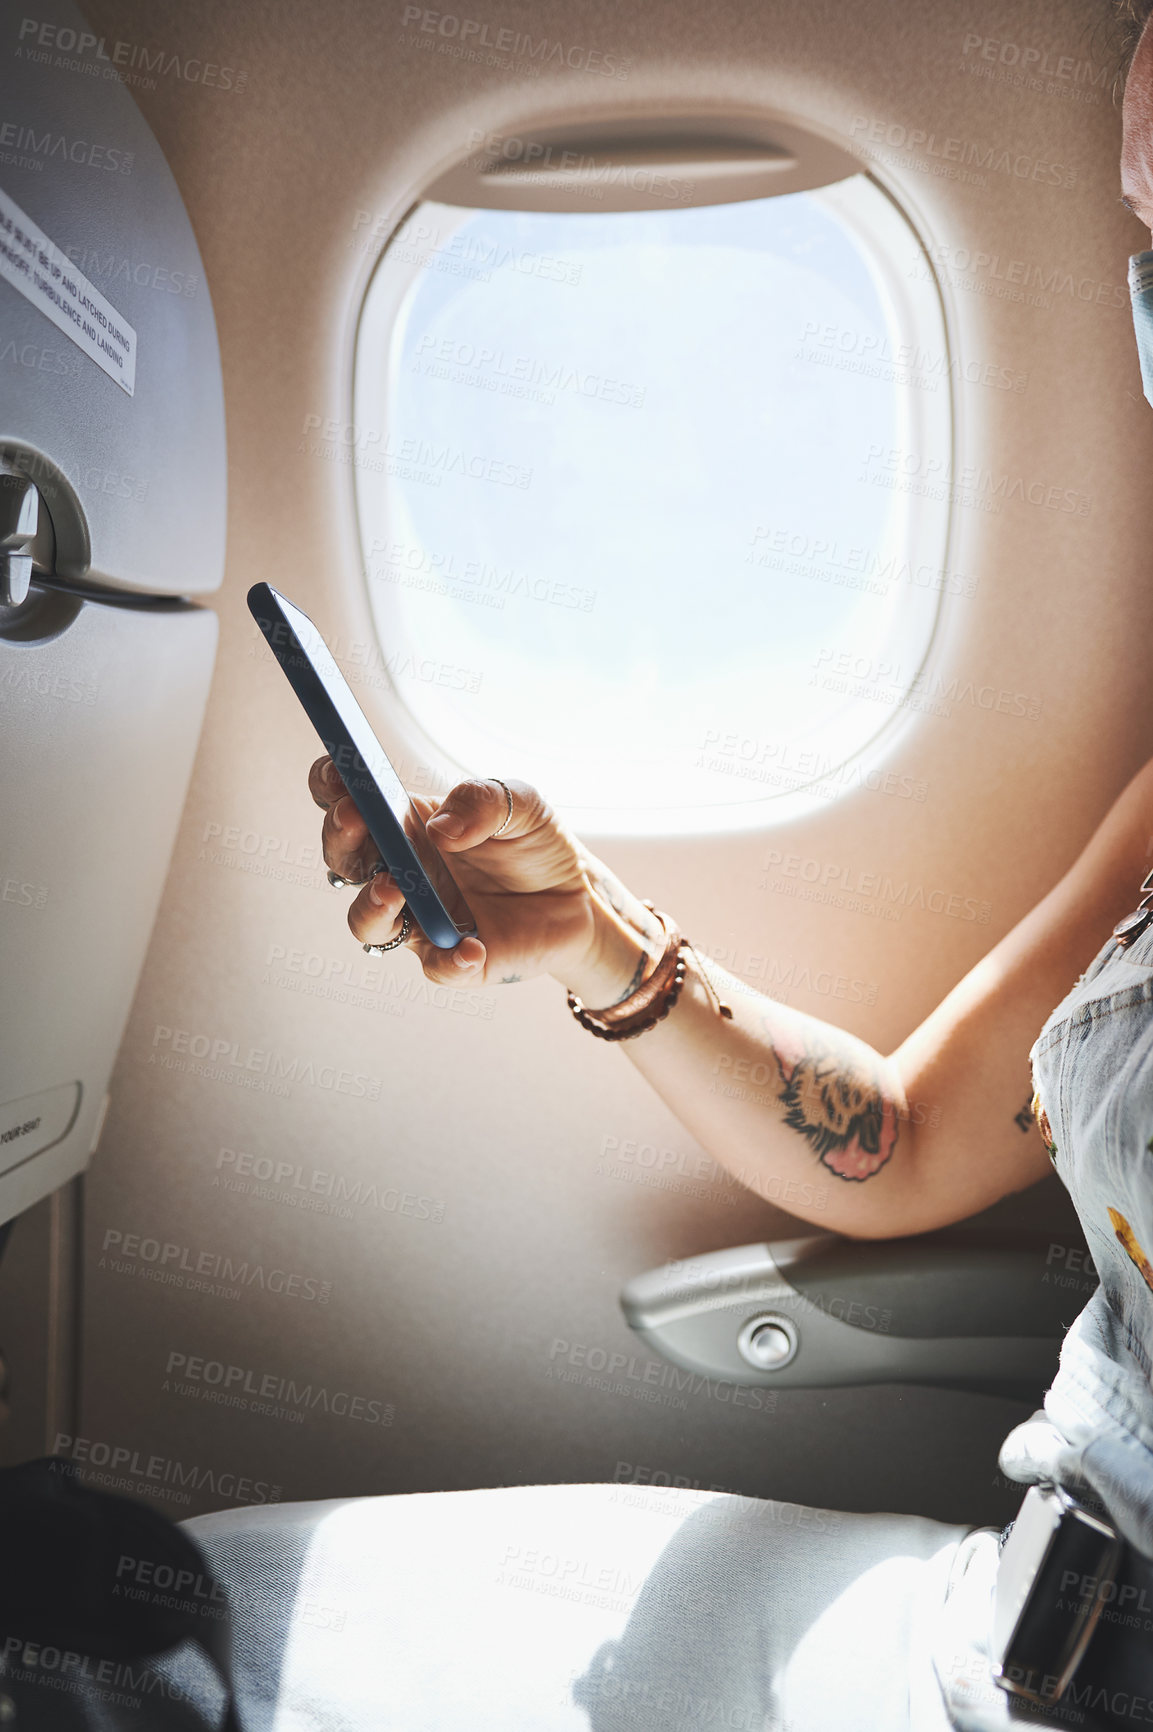 Buy stock photo Cropped shot of a woman using her phone in the aeroplane